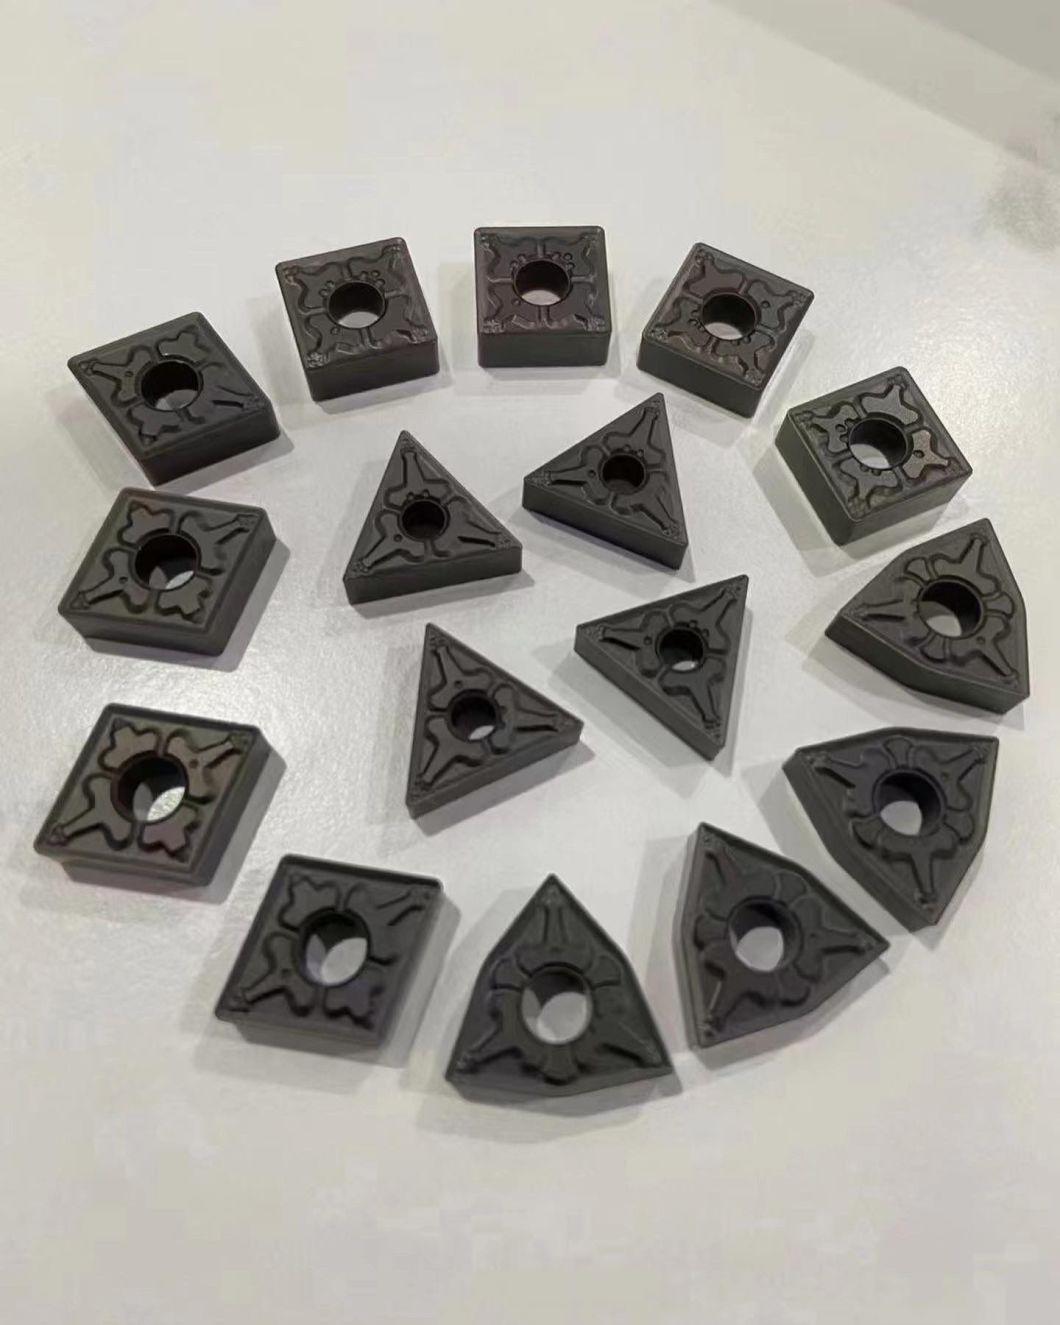 Tungsten Carbide CNC High Feed Turning Thread Milling Inserts Cnmg190608